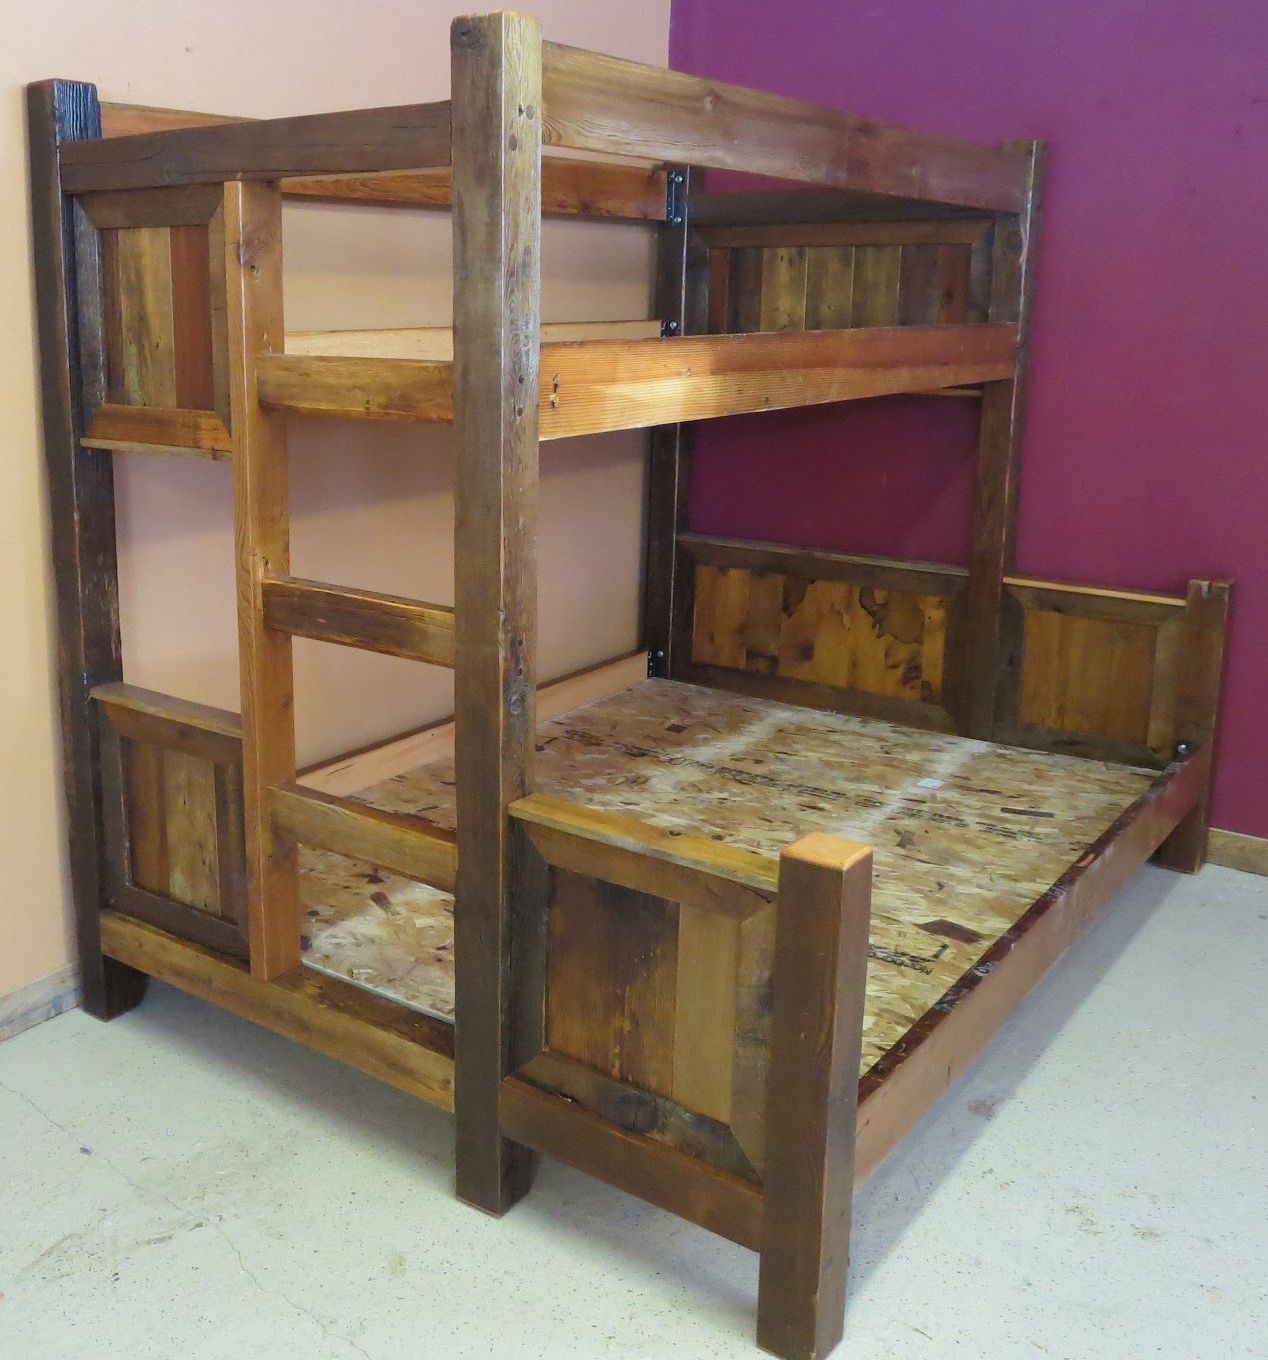 Barnwood Bunk Beds Twin Over Full, Antique Wooden Bunk Beds